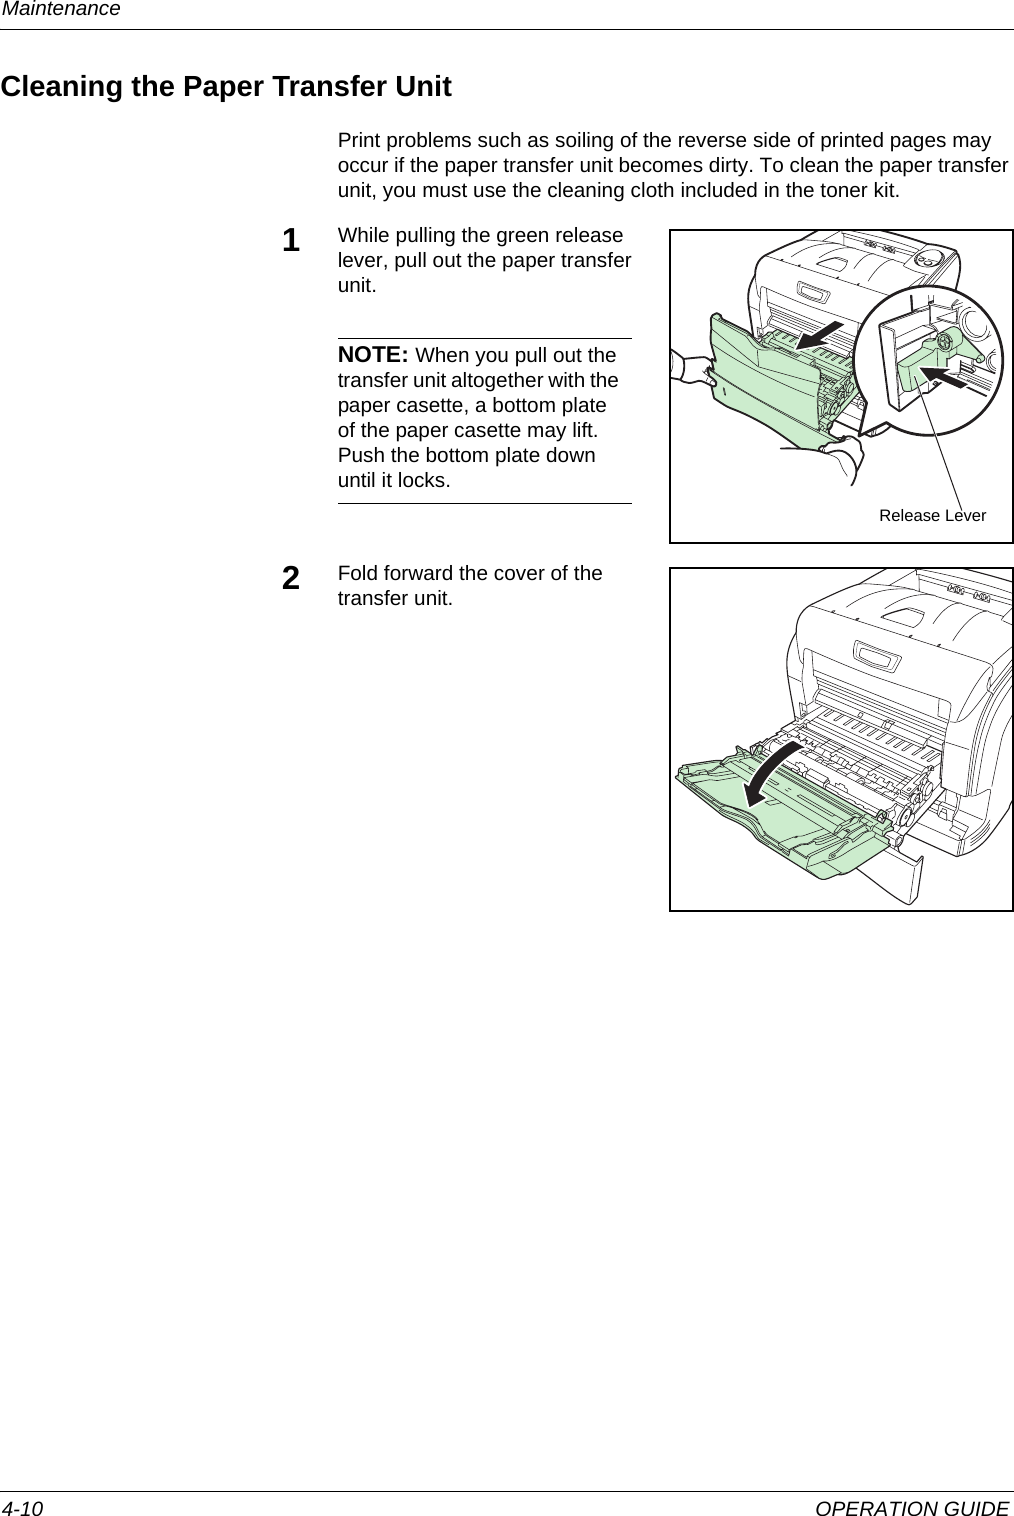 Maintenance 4-10 OPERATION GUIDECleaning the Paper Transfer UnitPrint problems such as soiling of the reverse side of printed pages may occur if the paper transfer unit becomes dirty. To clean the paper transfer unit, you must use the cleaning cloth included in the toner kit.1While pulling the green release lever, pull out the paper transfer unit.NOTE: When you pull out the transfer unit altogether with the paper casette, a bottom plate of the paper casette may lift. Push the bottom plate down until it locks.2Fold forward the cover of the transfer unit.Release Lever